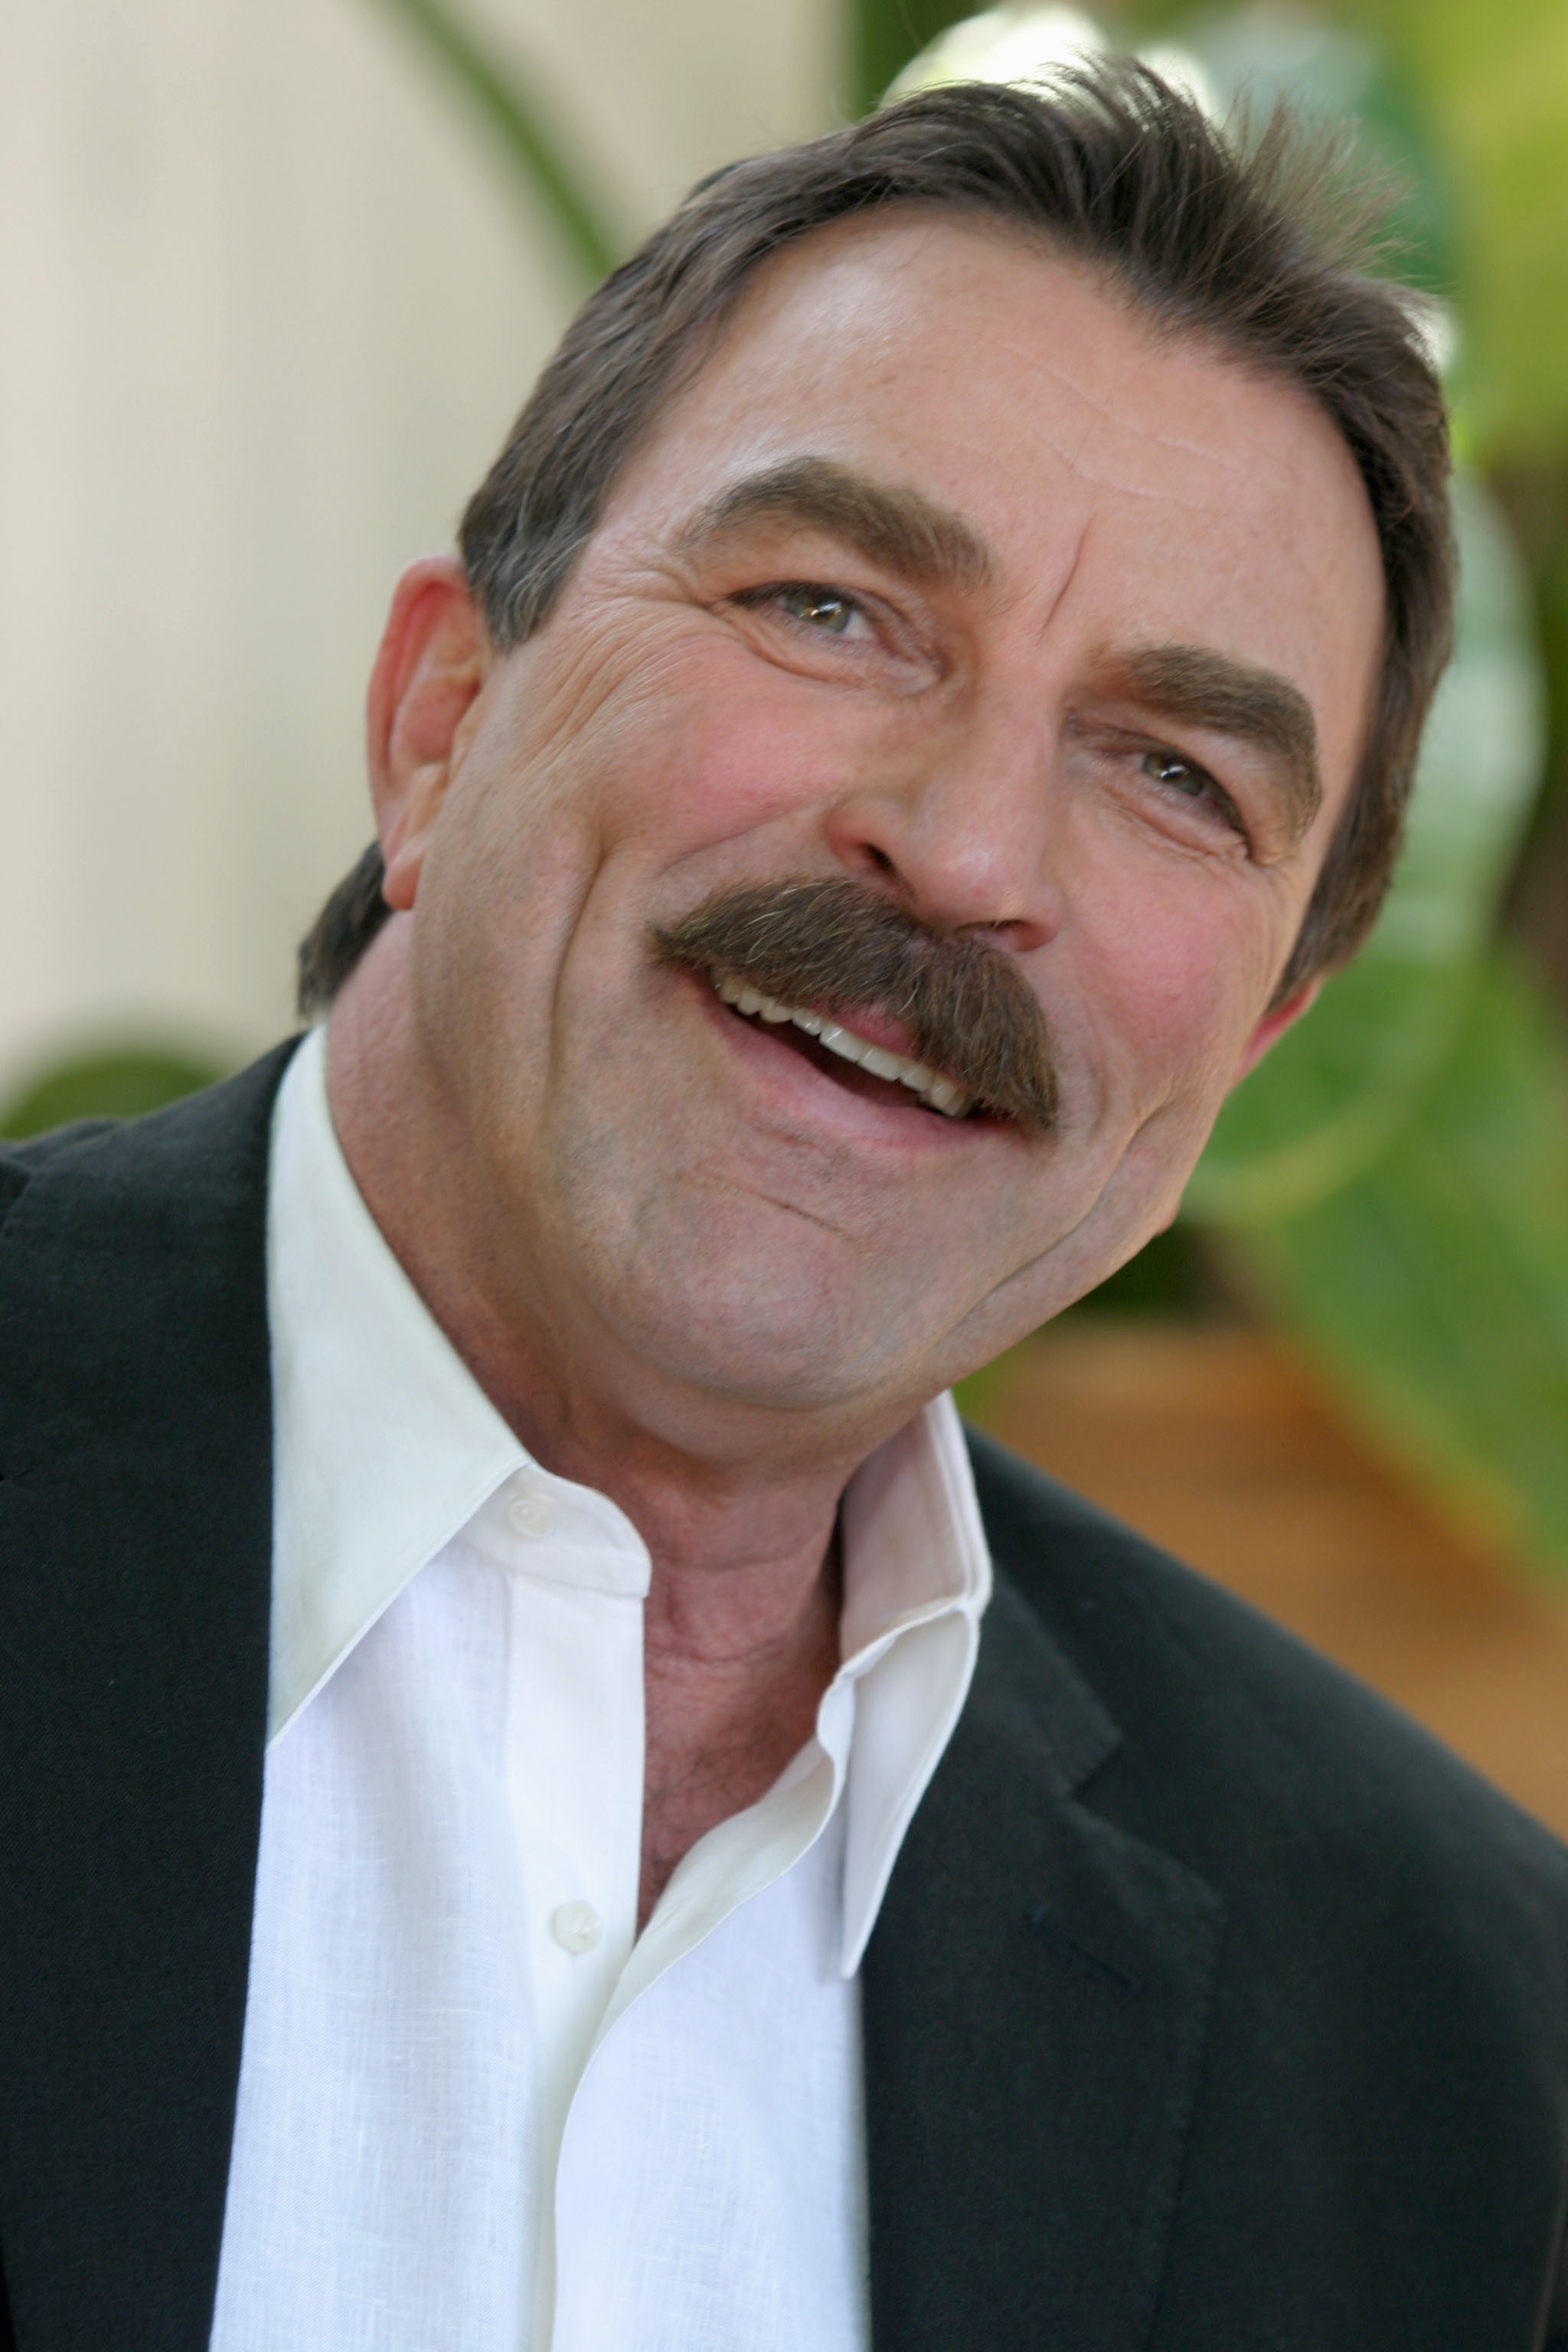 Tom Selleck makes an appearance at the office of the Hollywood Foreign Press Association on April 18, 2006, in Los Angeles, California | Source: Getty Images